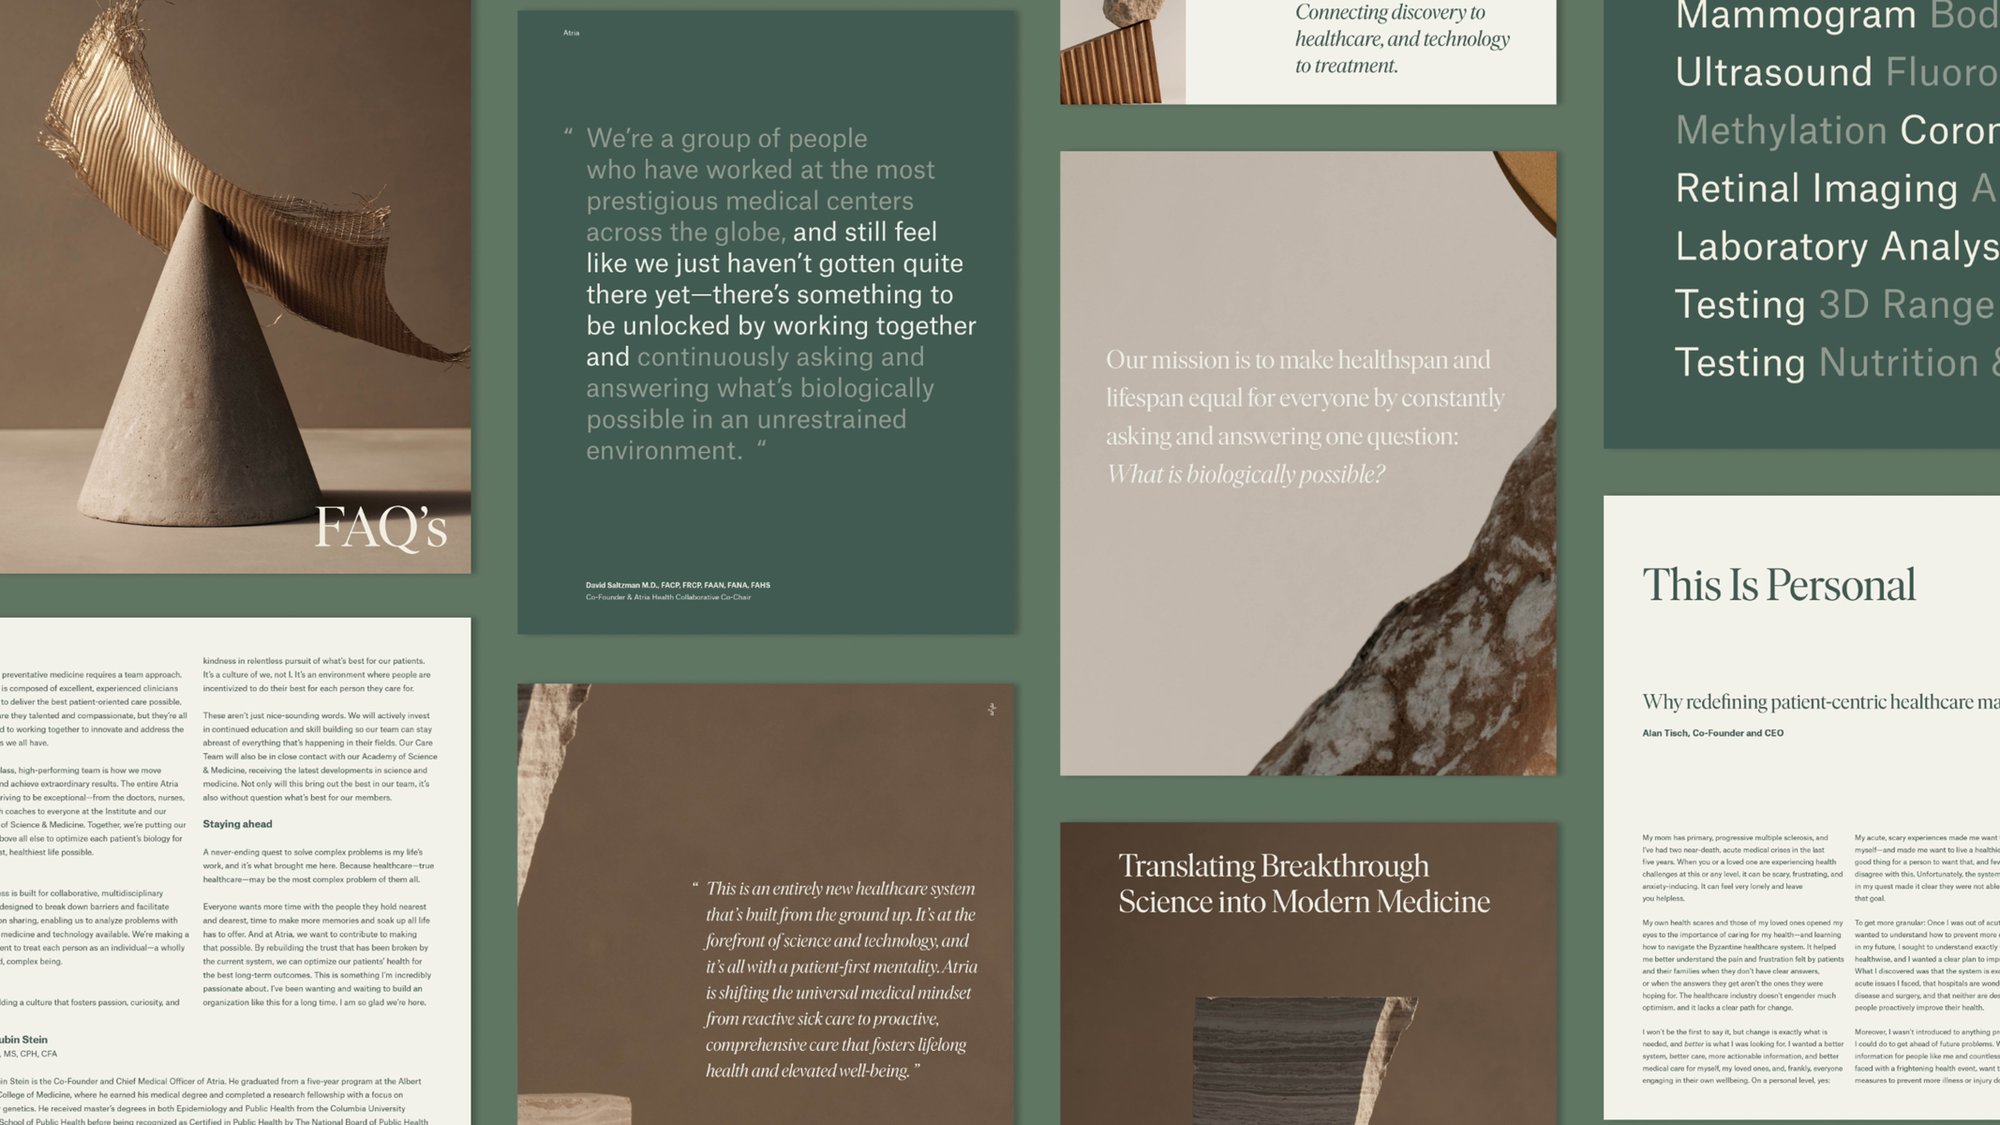 Brand identity and educational brochure pages that include quotes from the team, letters to patients, facts about the company, project management FAQs, production needs, and a list of offerings